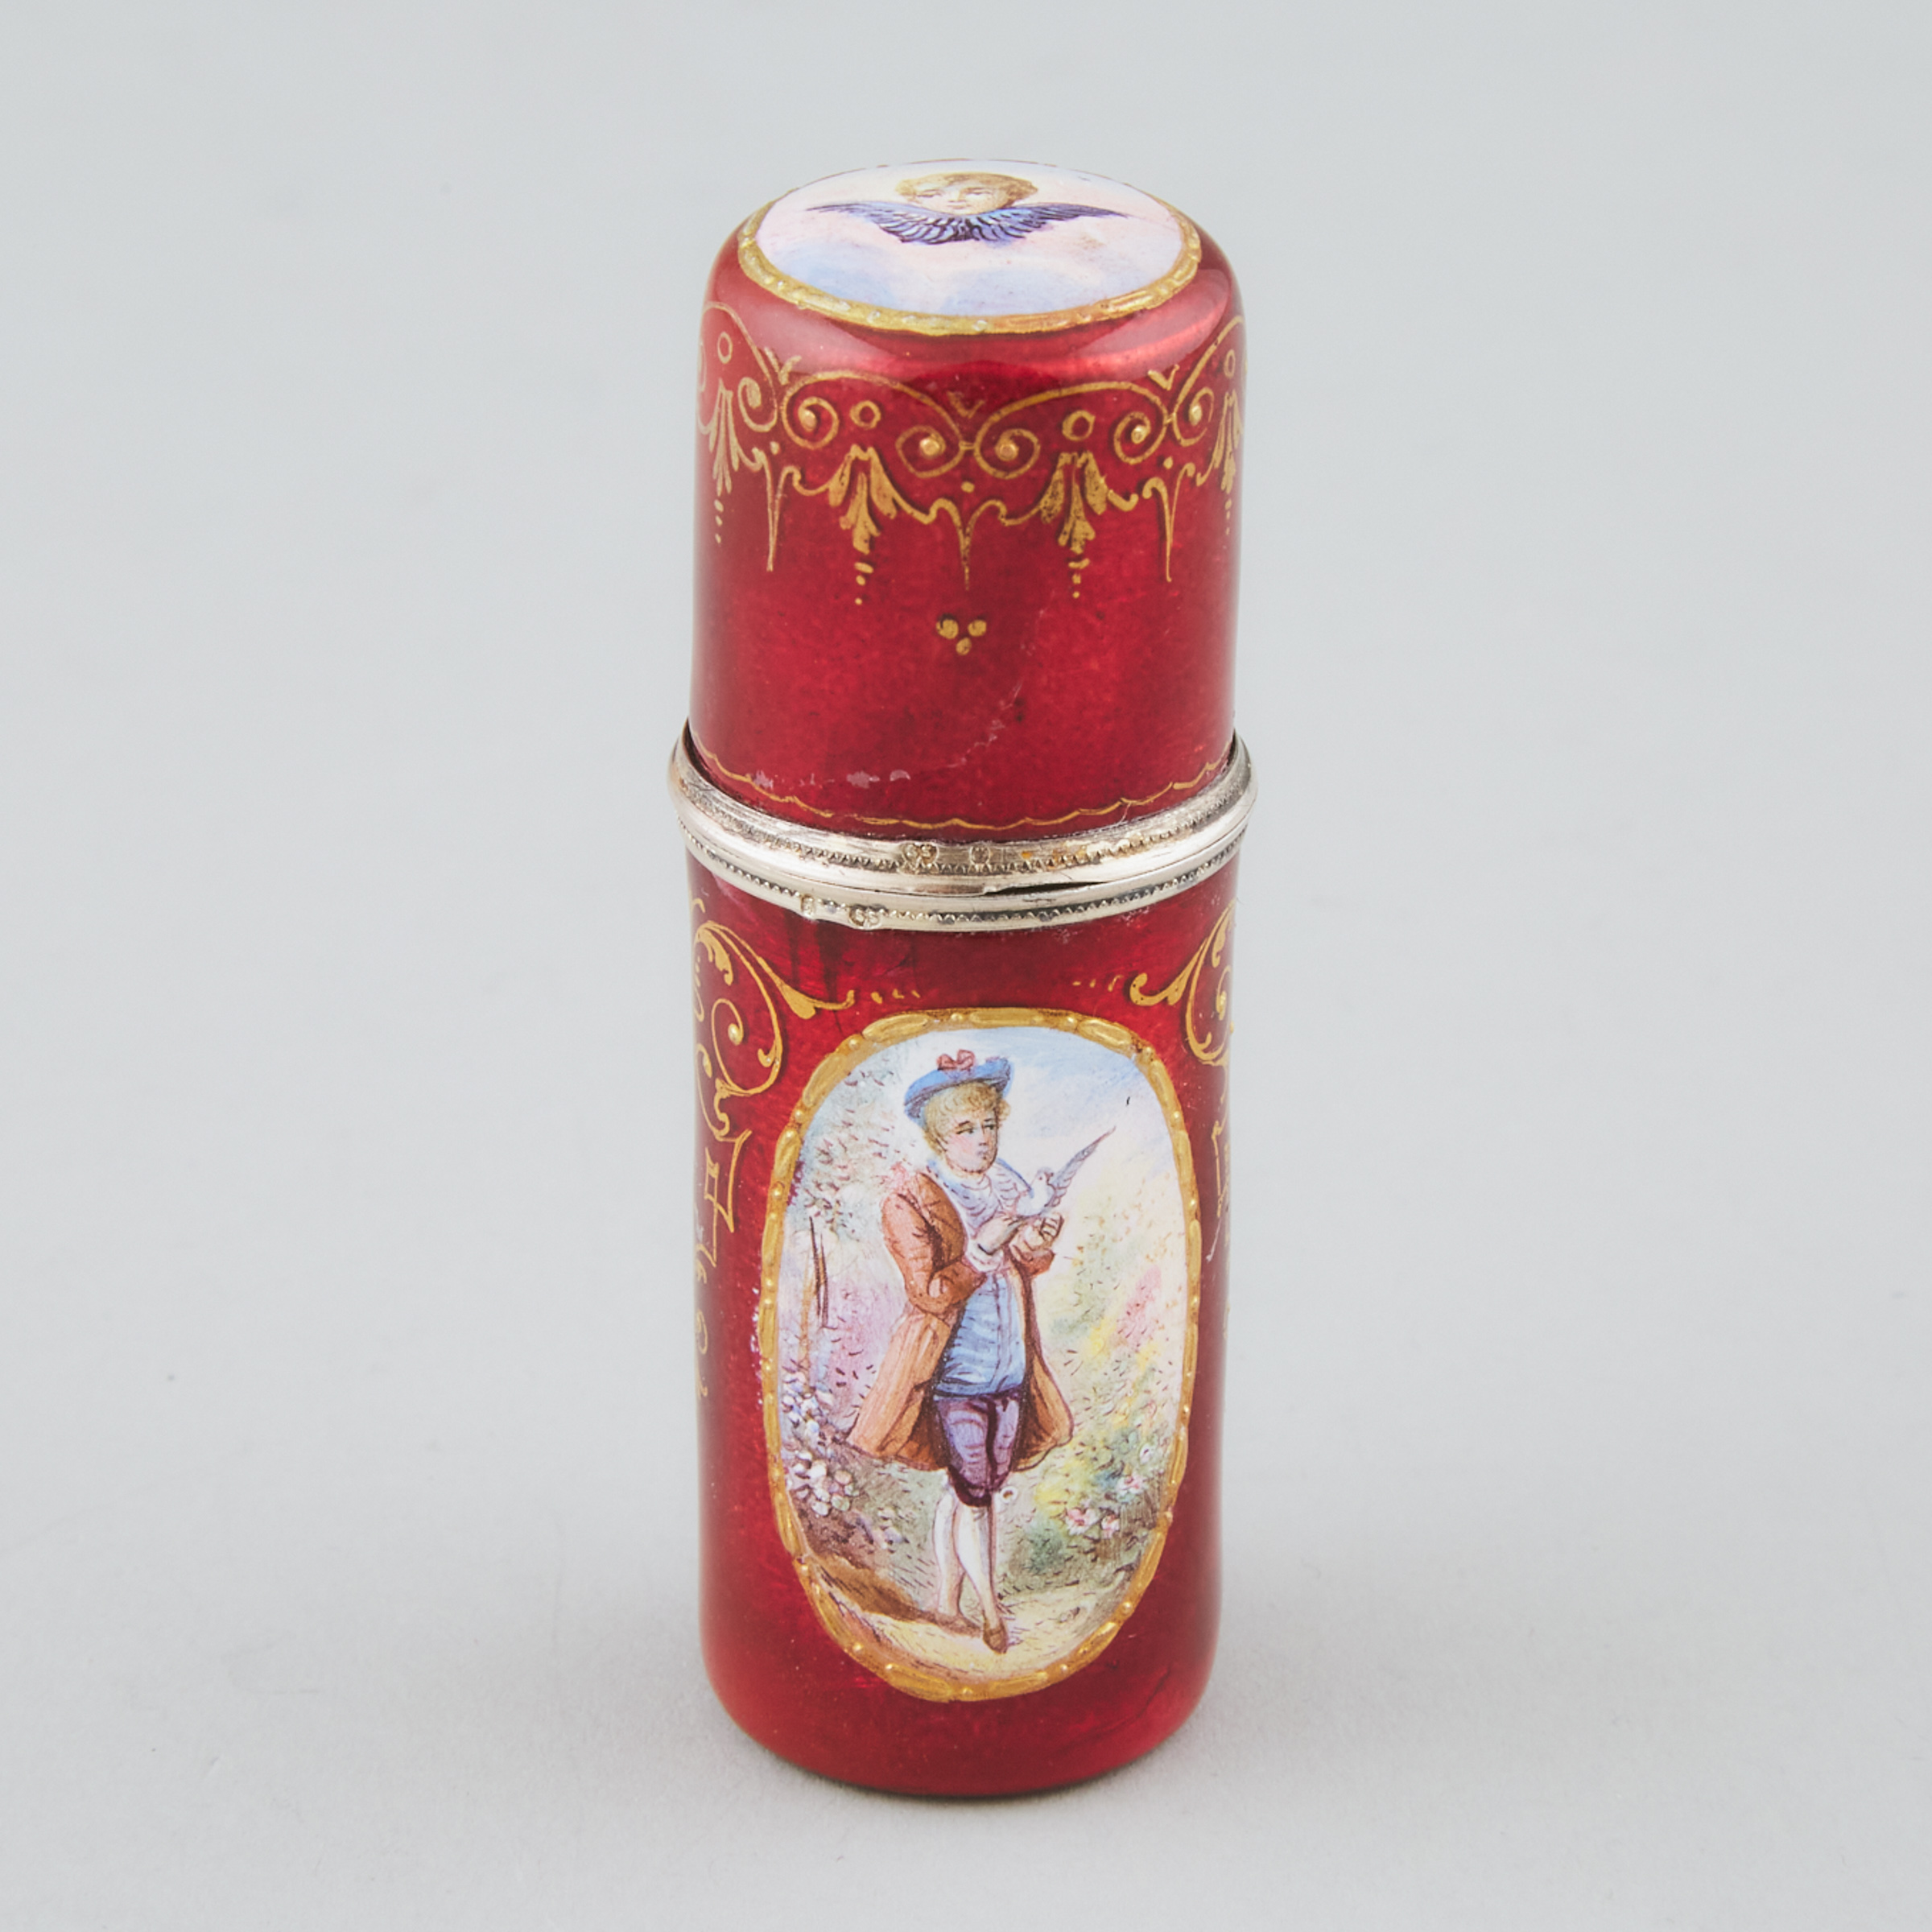 Viennese Silver and Painted Translucent Red Enamel Cylinder Shaped Vinaigrette, c.1900